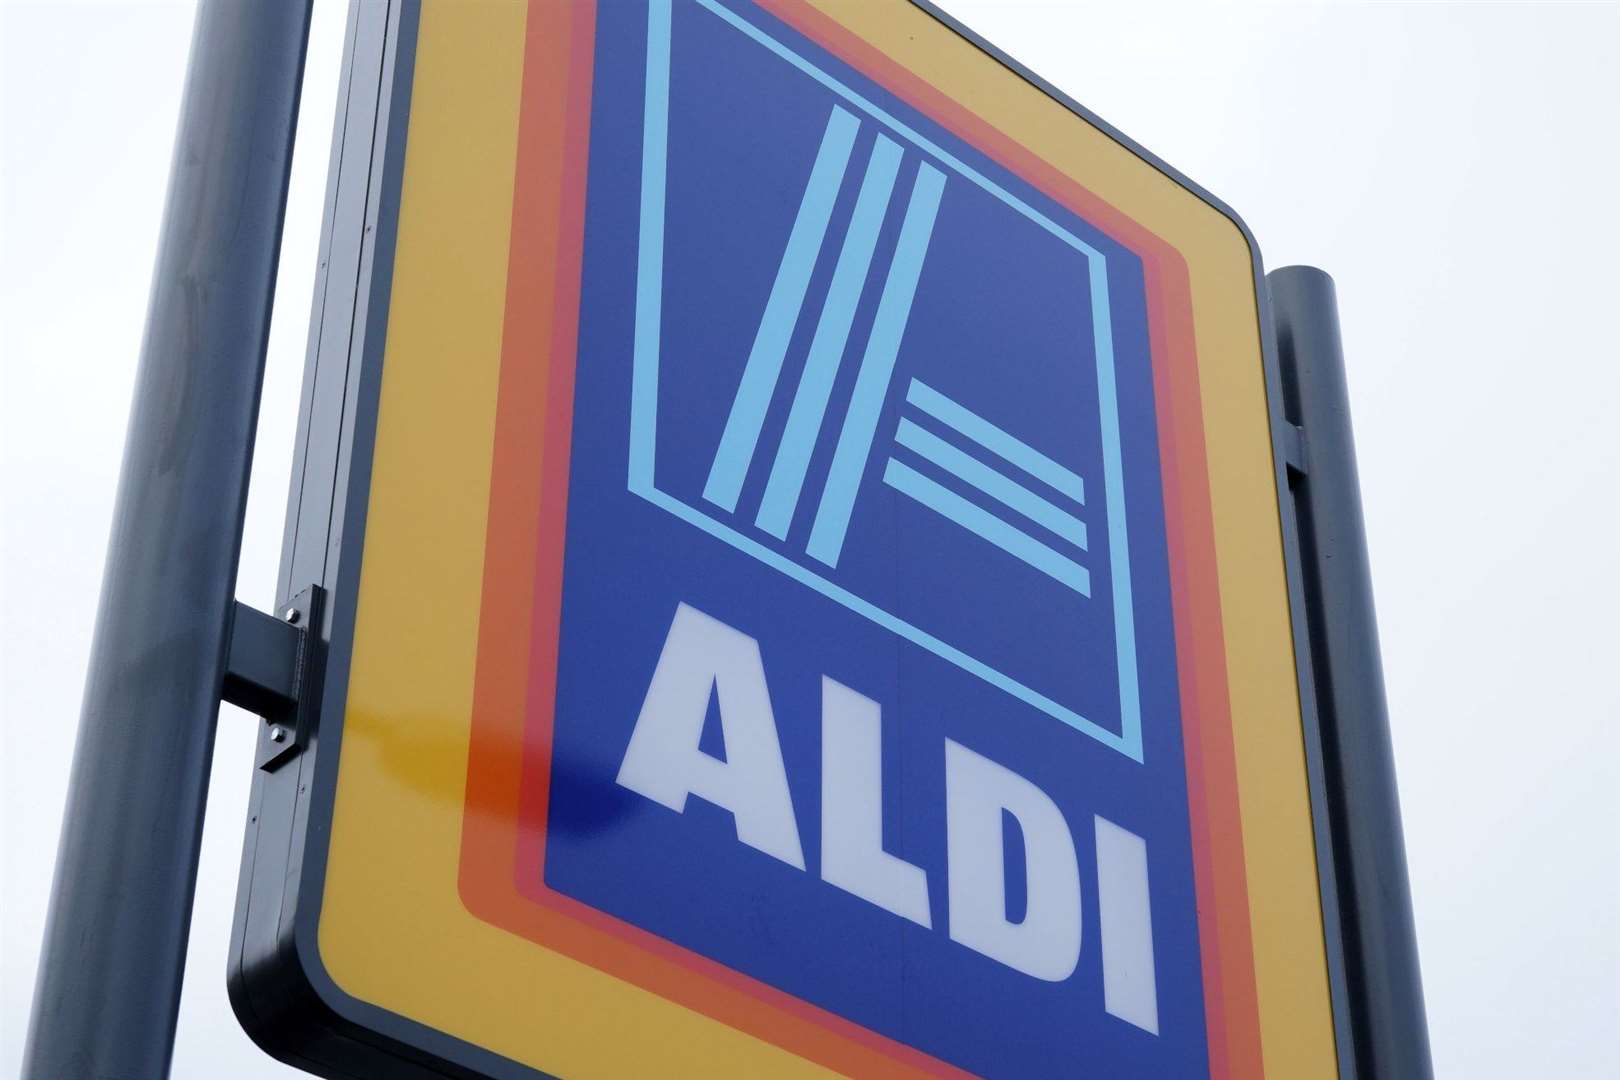 Aldi is investing heavily in British food and drink as it continues to expand